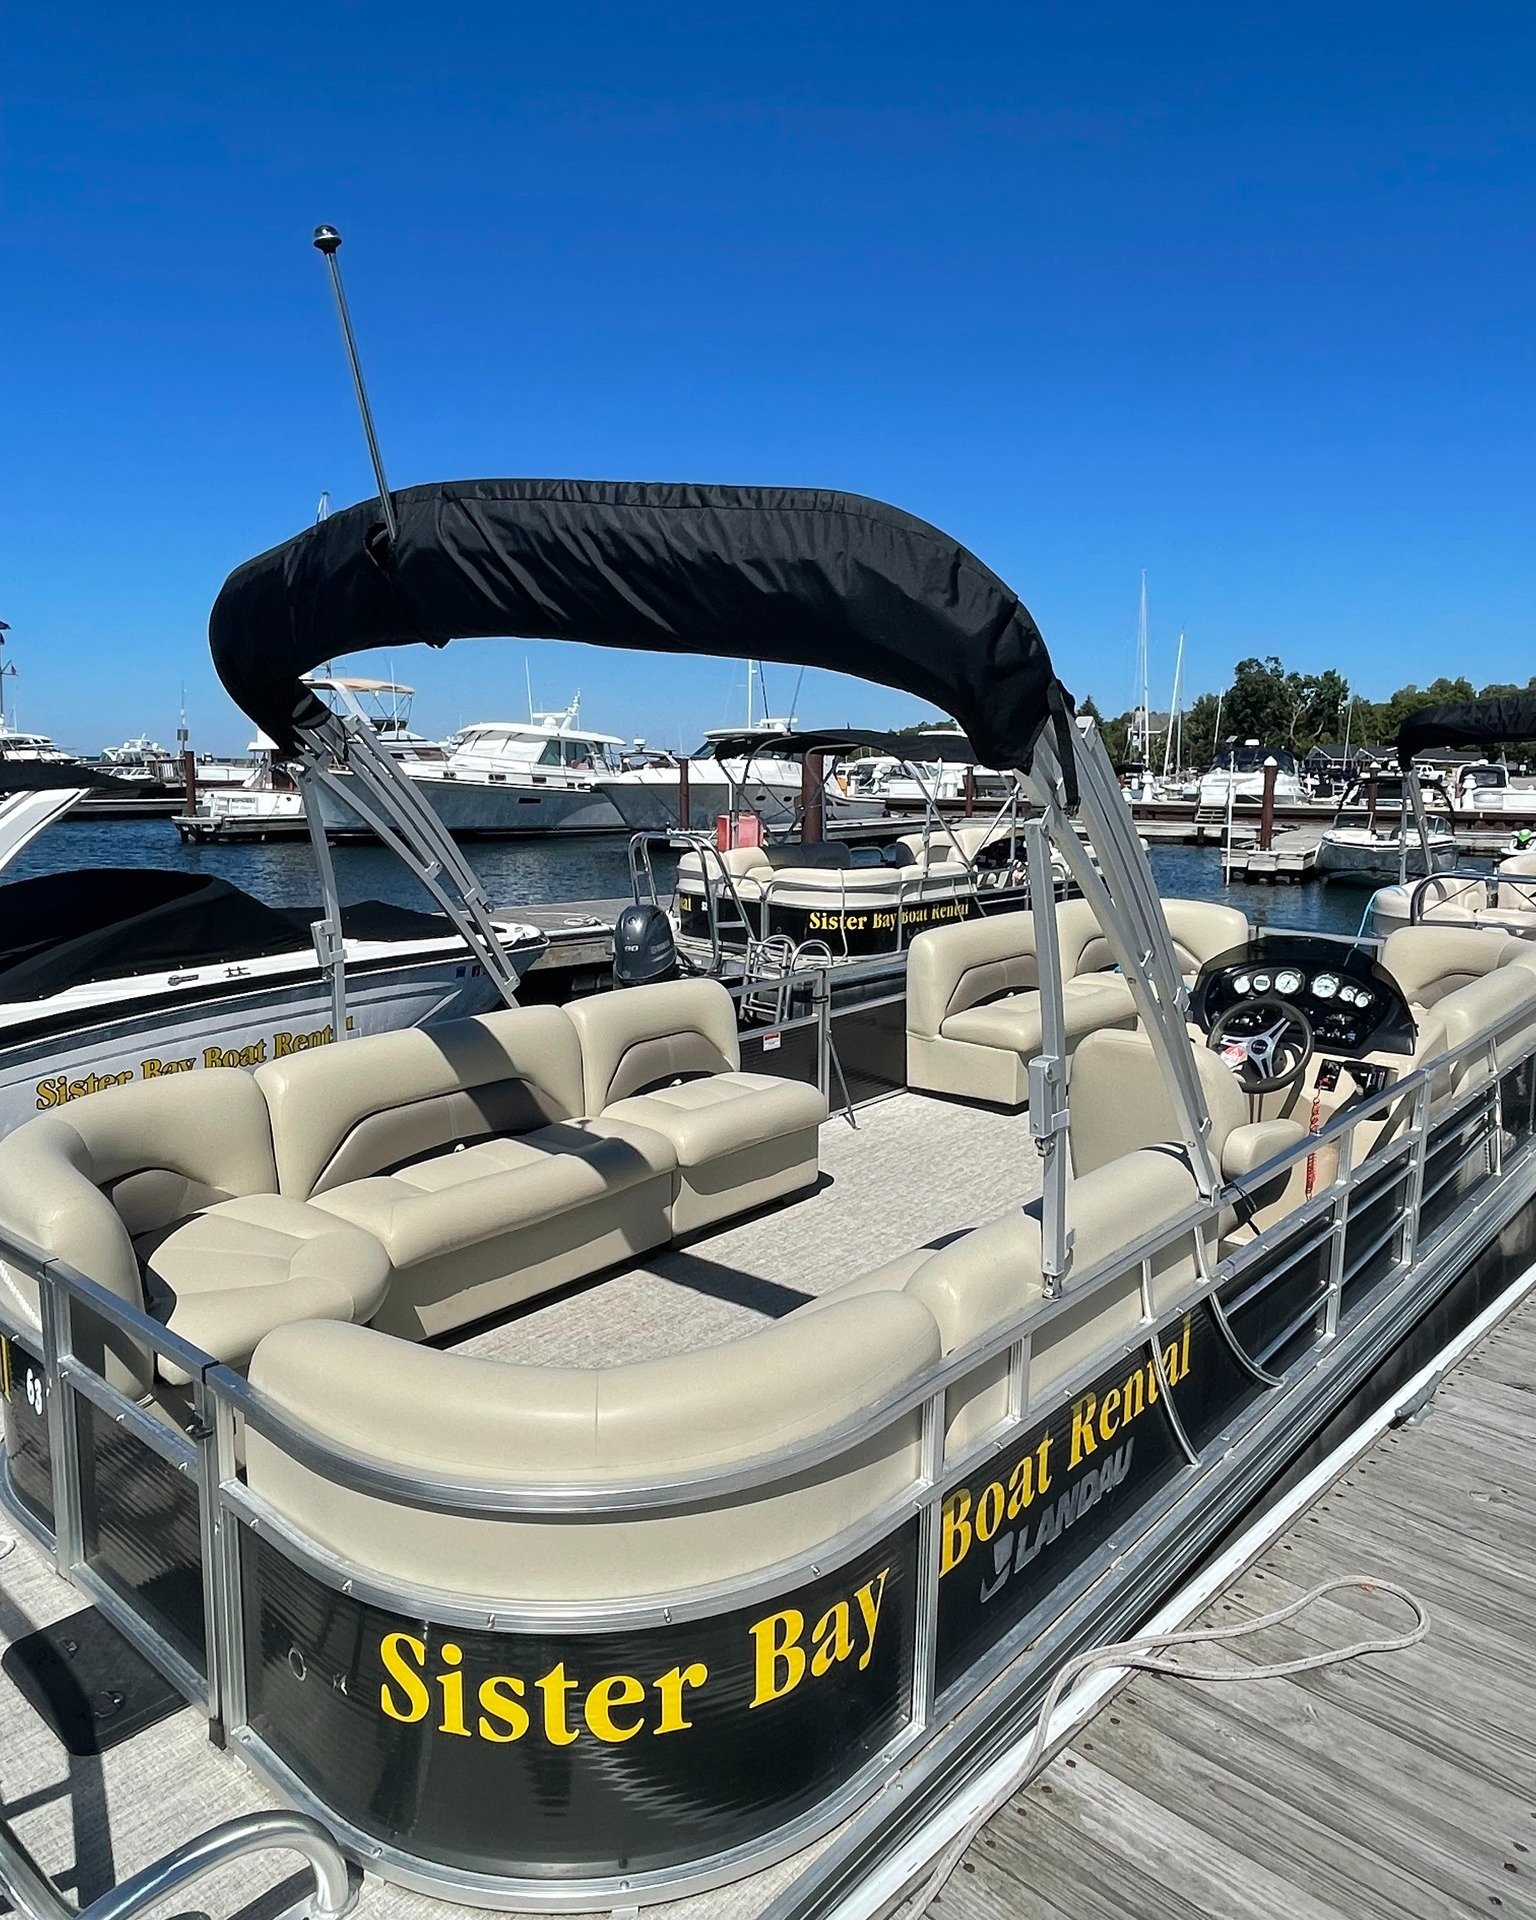 @doorcountyboats is there for all your boating needs this summer! Boat rentals, boat tours, and even tubing behind the boats! 
 
You have to check them out and see why people say they&rsquo;re one of the best in the county!
 
Book online today at www